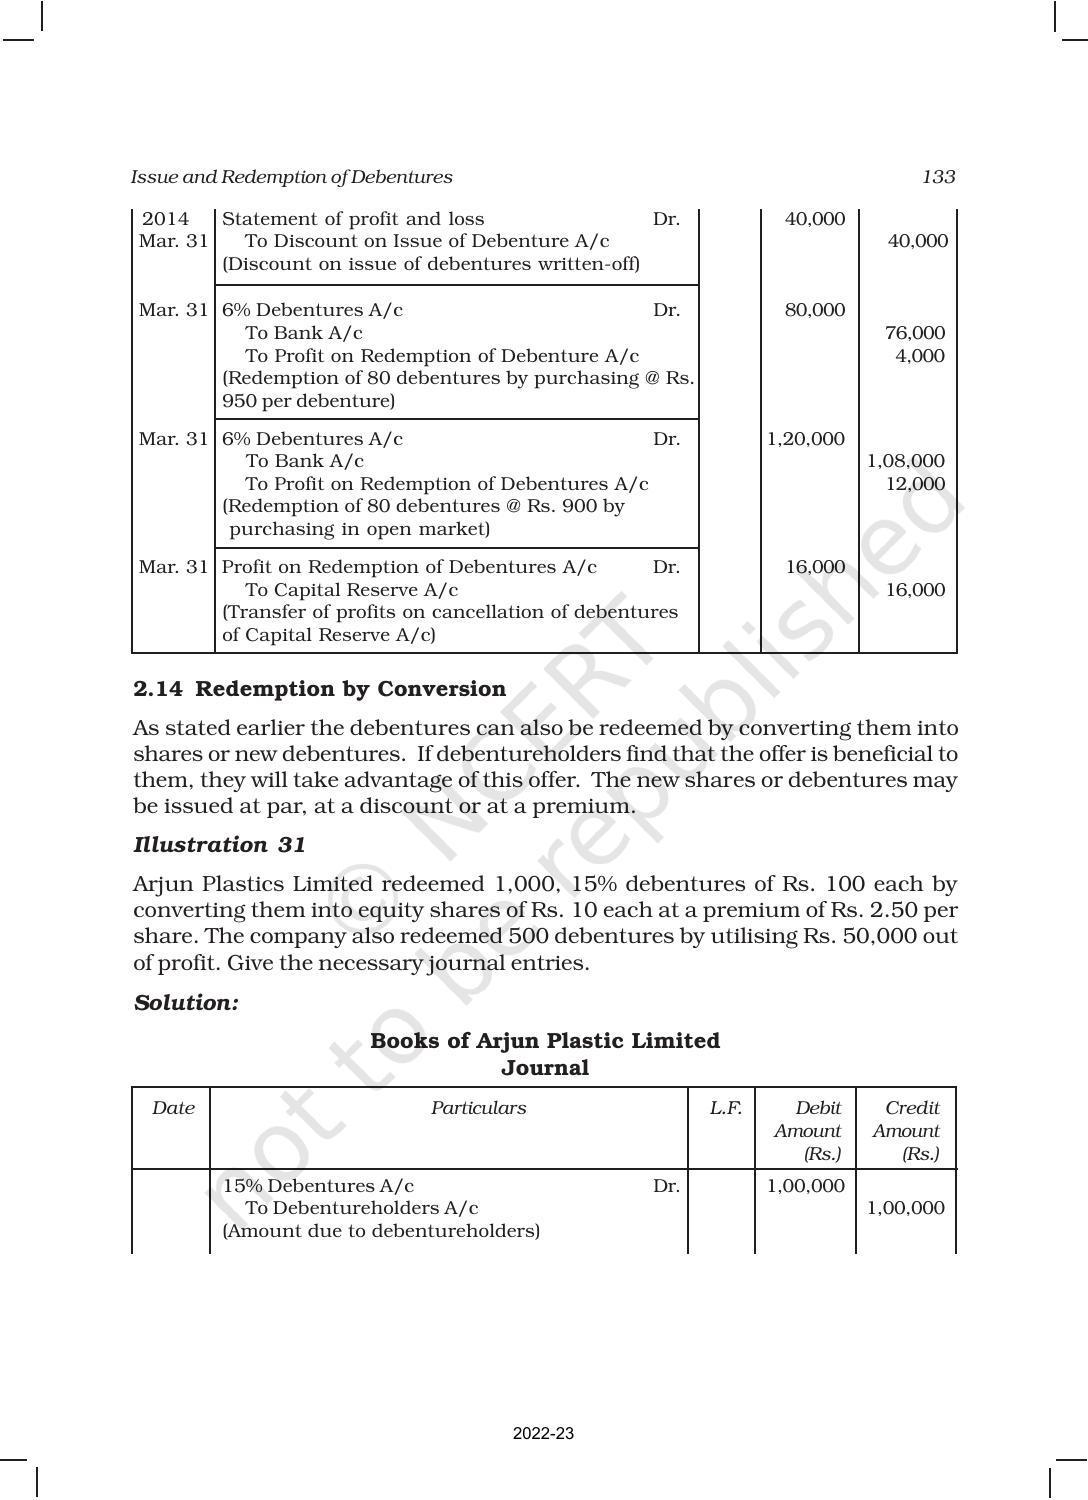 NCERT Book for Class 12 Accountancy Part II Chapter 1 Issue and Redemption of Debentures - Page 59